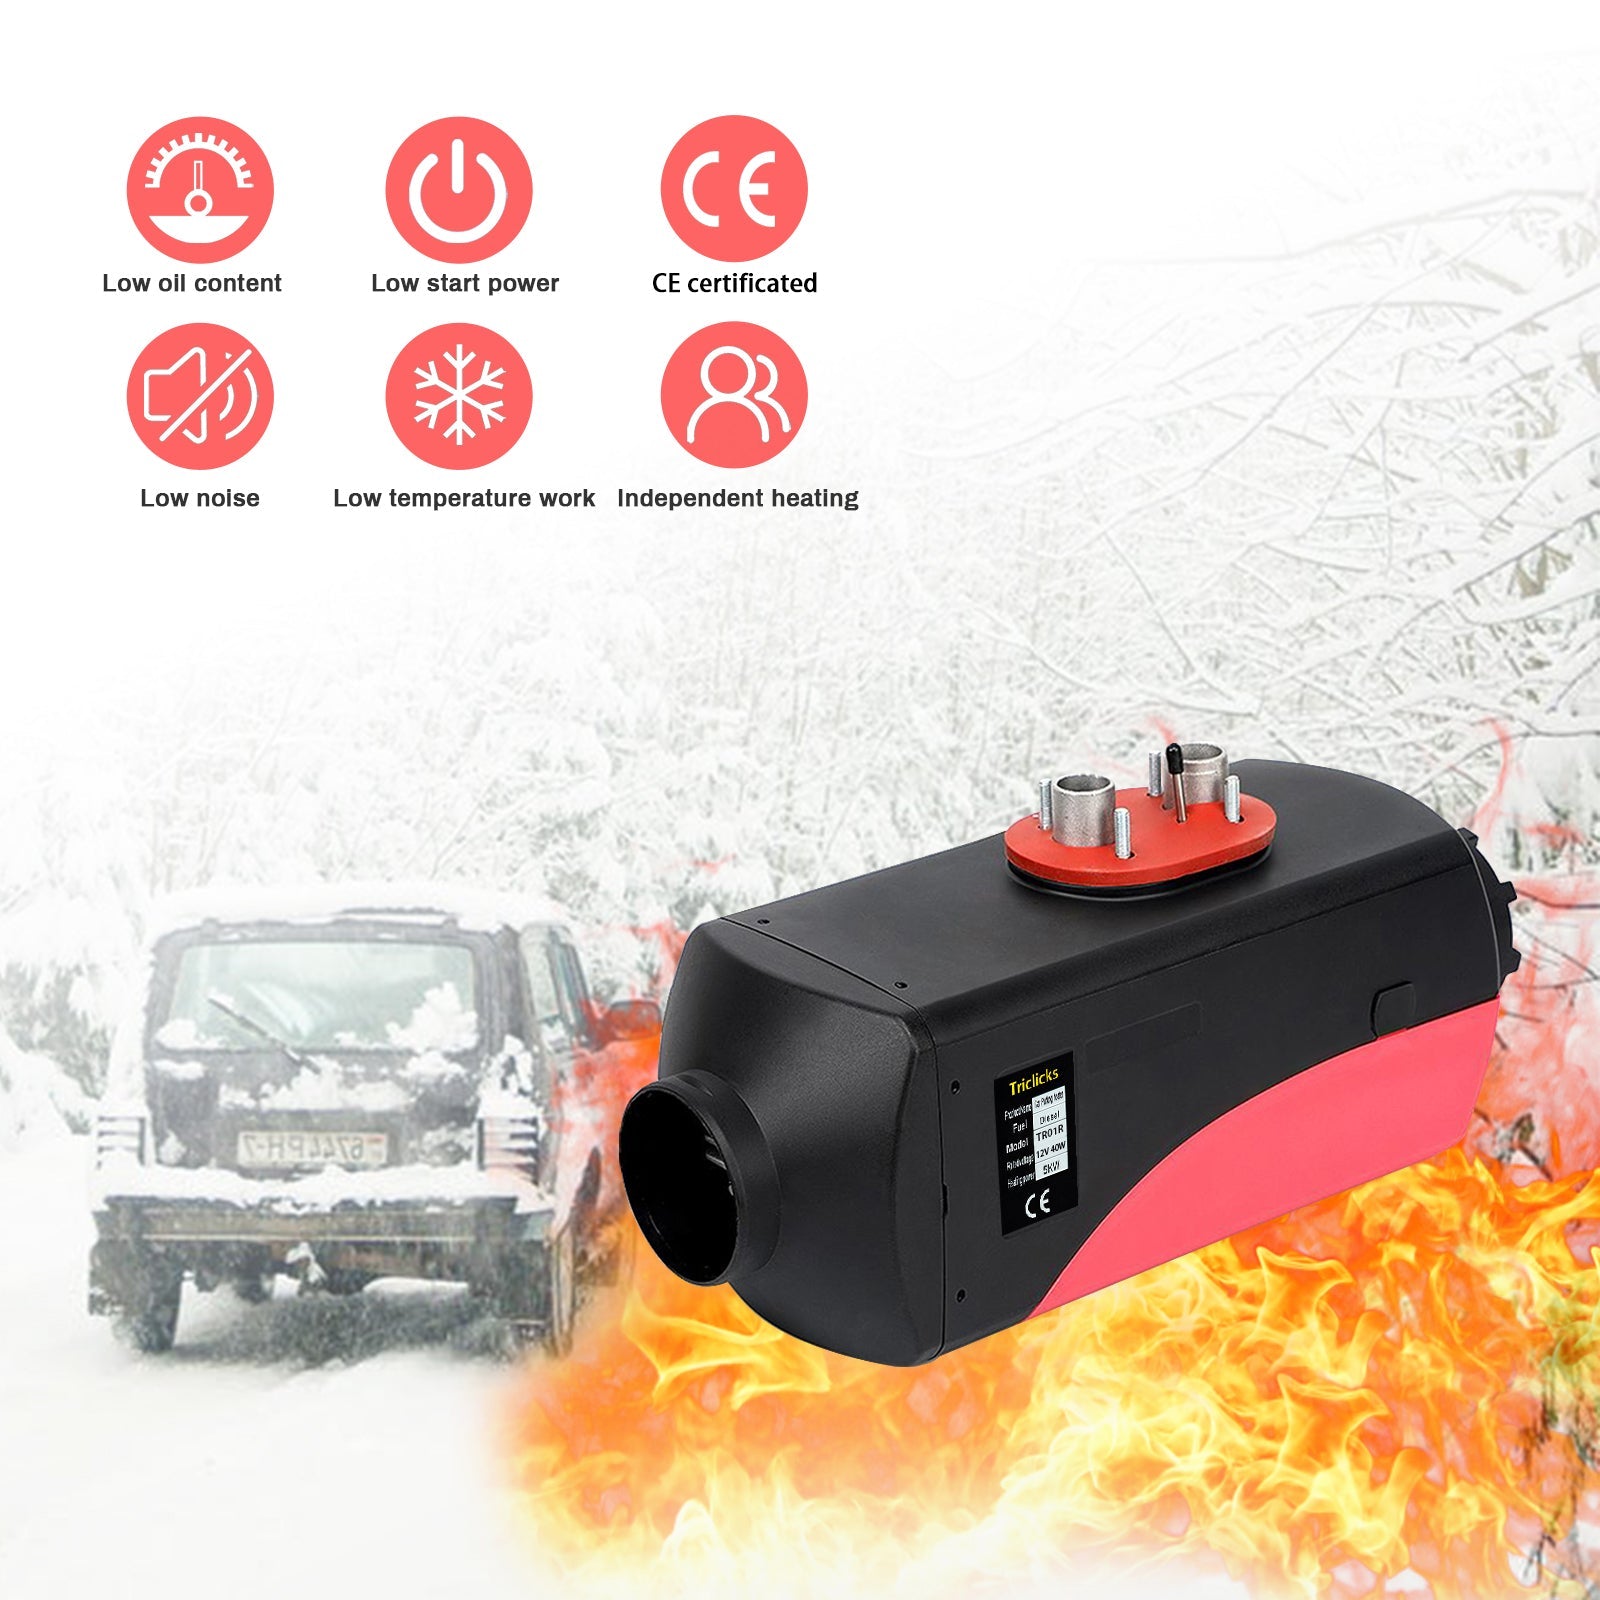 Triclicks 5KW 12V Chinese Cheap Air Diesel Parking Heater Red&Black-01R